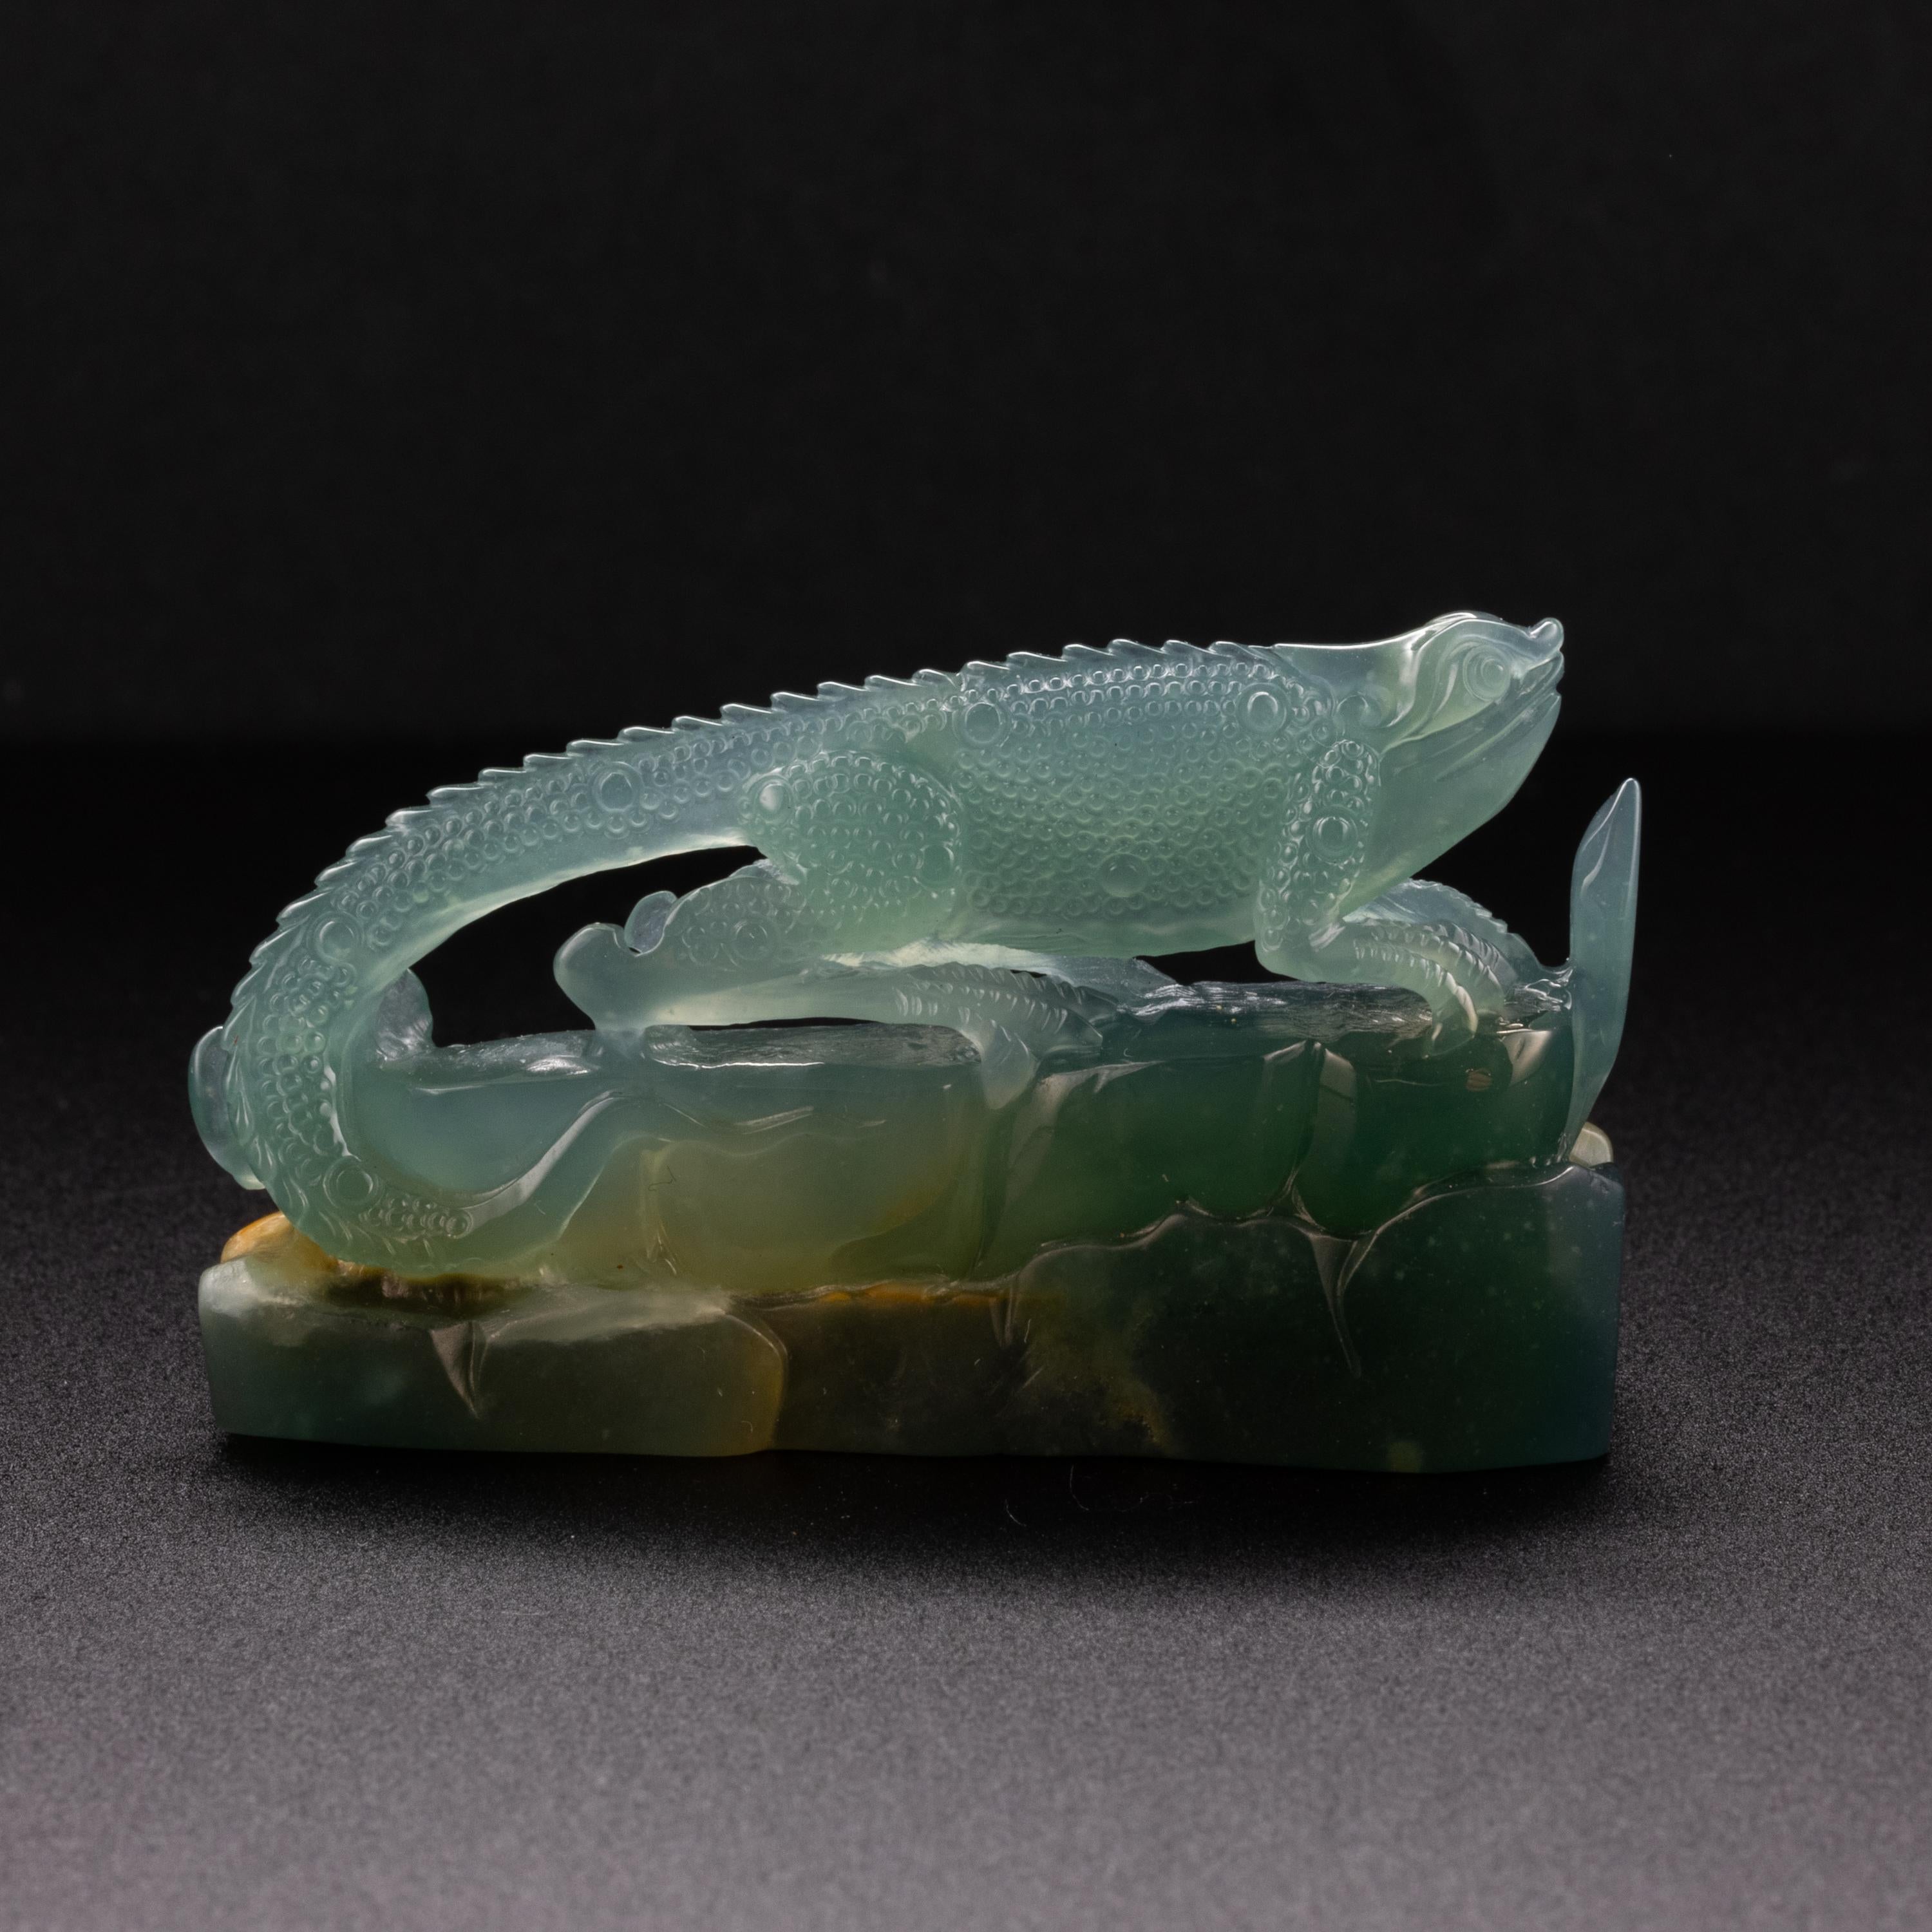 Winter will be here soon. Do you need a companion on your desk or beside your bed? This artfully and skillfully carved iguana may be the friend you need. 

Most fine jadeite comes from Burma (Myanmar) but Guatemala is another of very few sources of